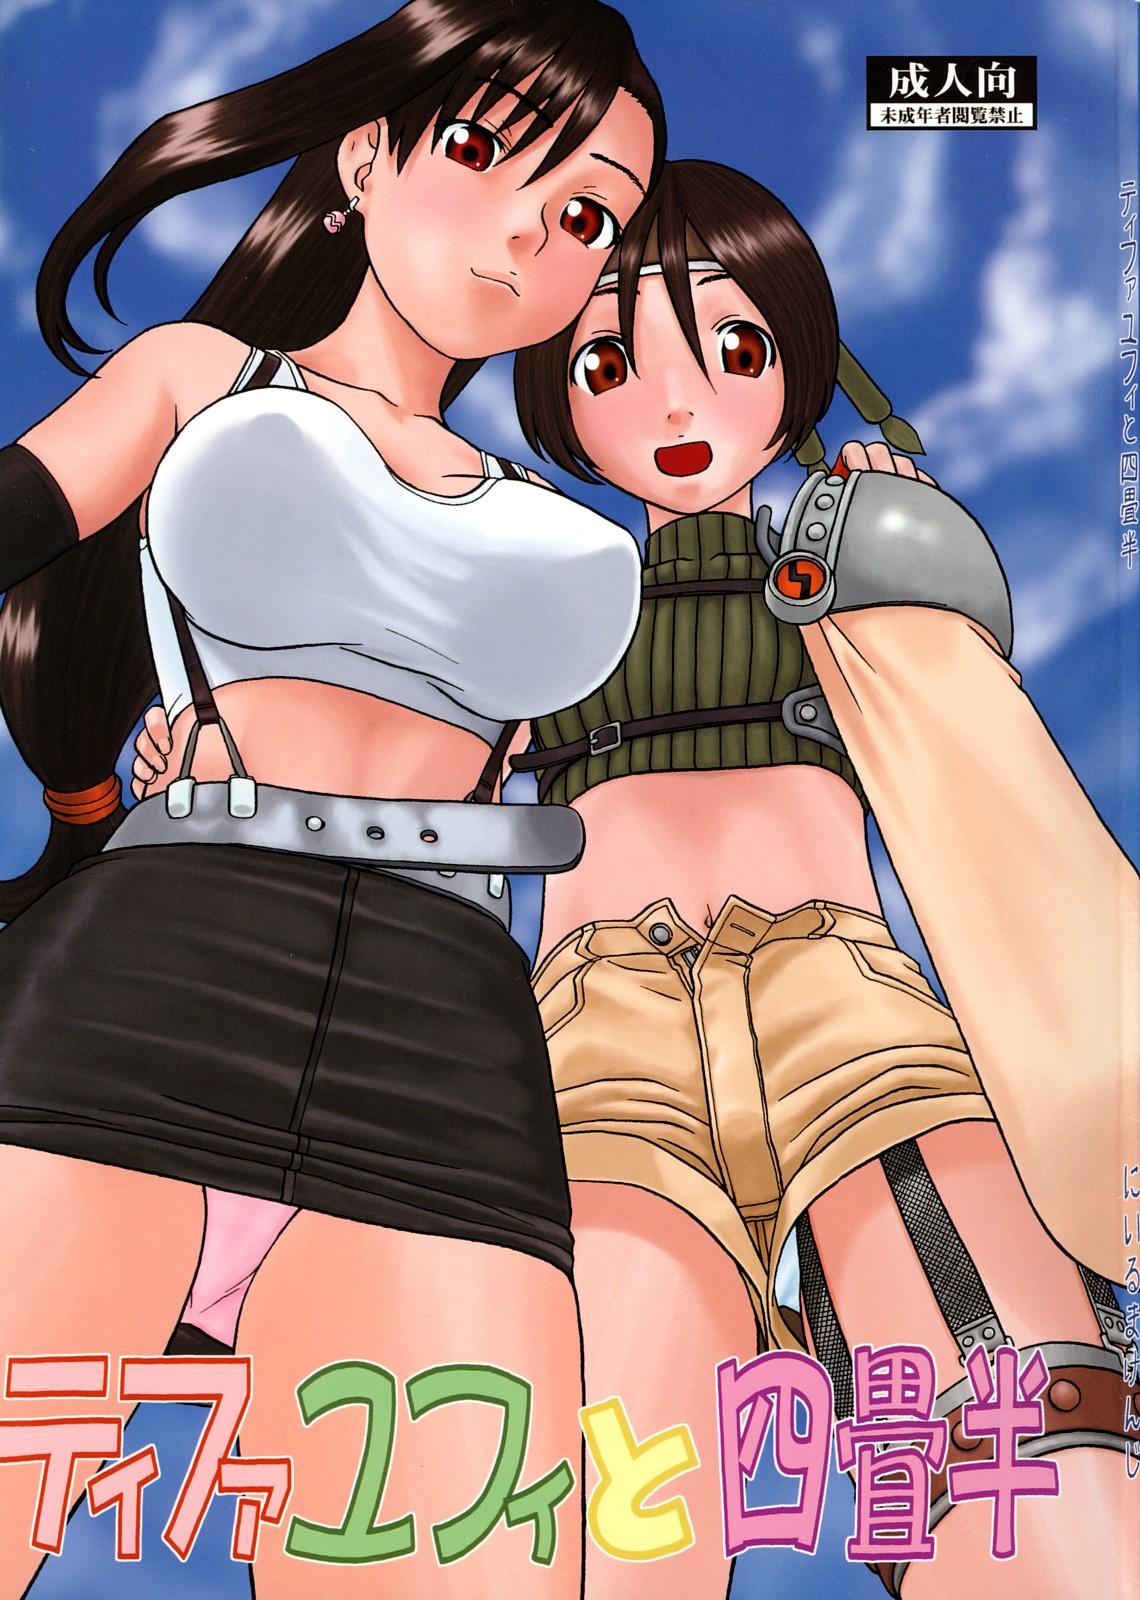 Face Tifa to Yuffie to Yojouhan - Final fantasy vii Sixtynine - Picture 1